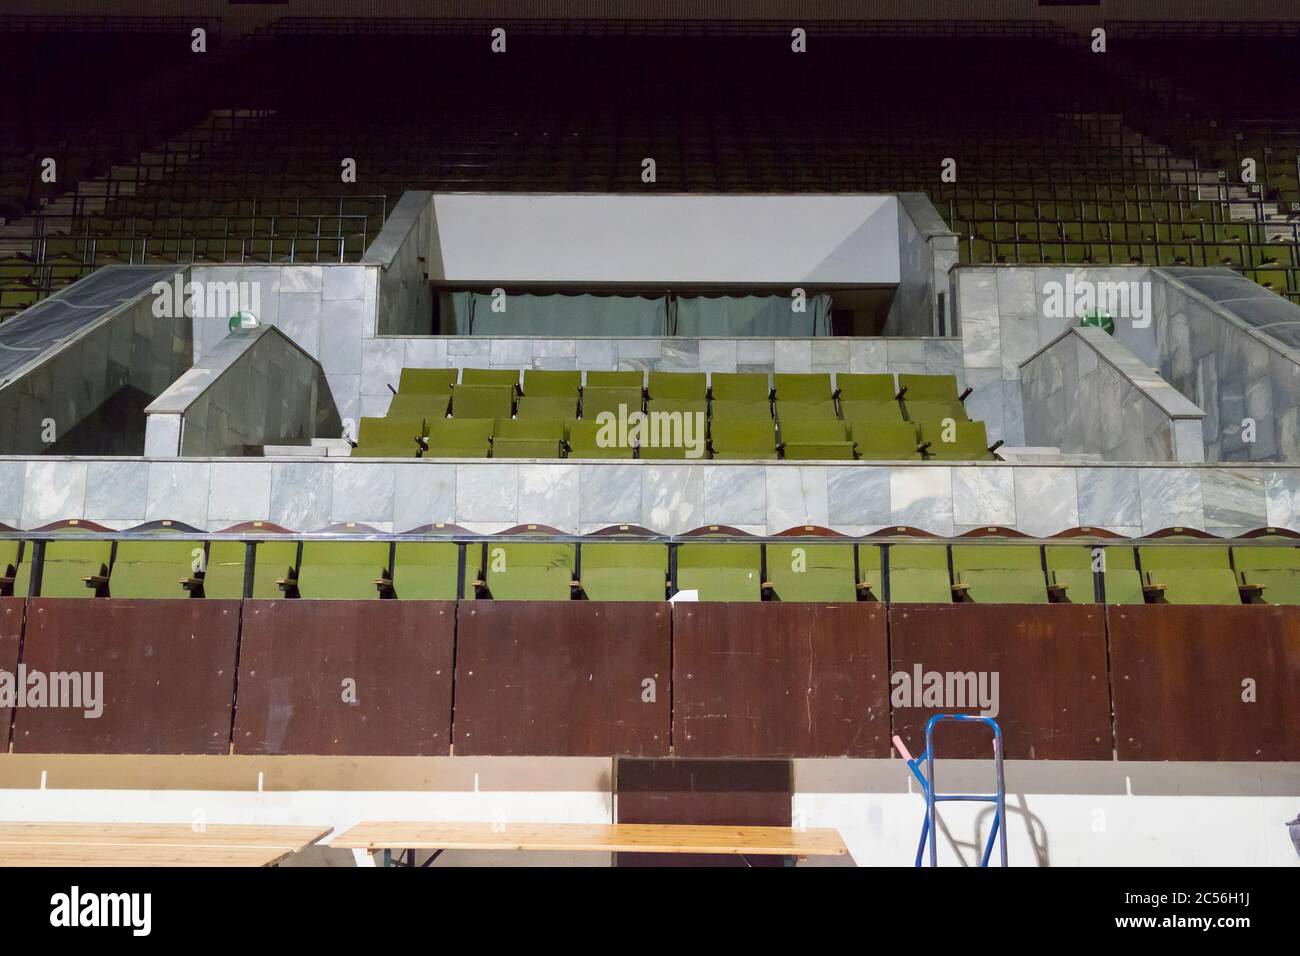 A view of the interior green stadium seating of the Sporto Rūmai, a sport arena built by the Rusisans in 1971. Now closed. In Vilnius, Lithuania. Stock Photo